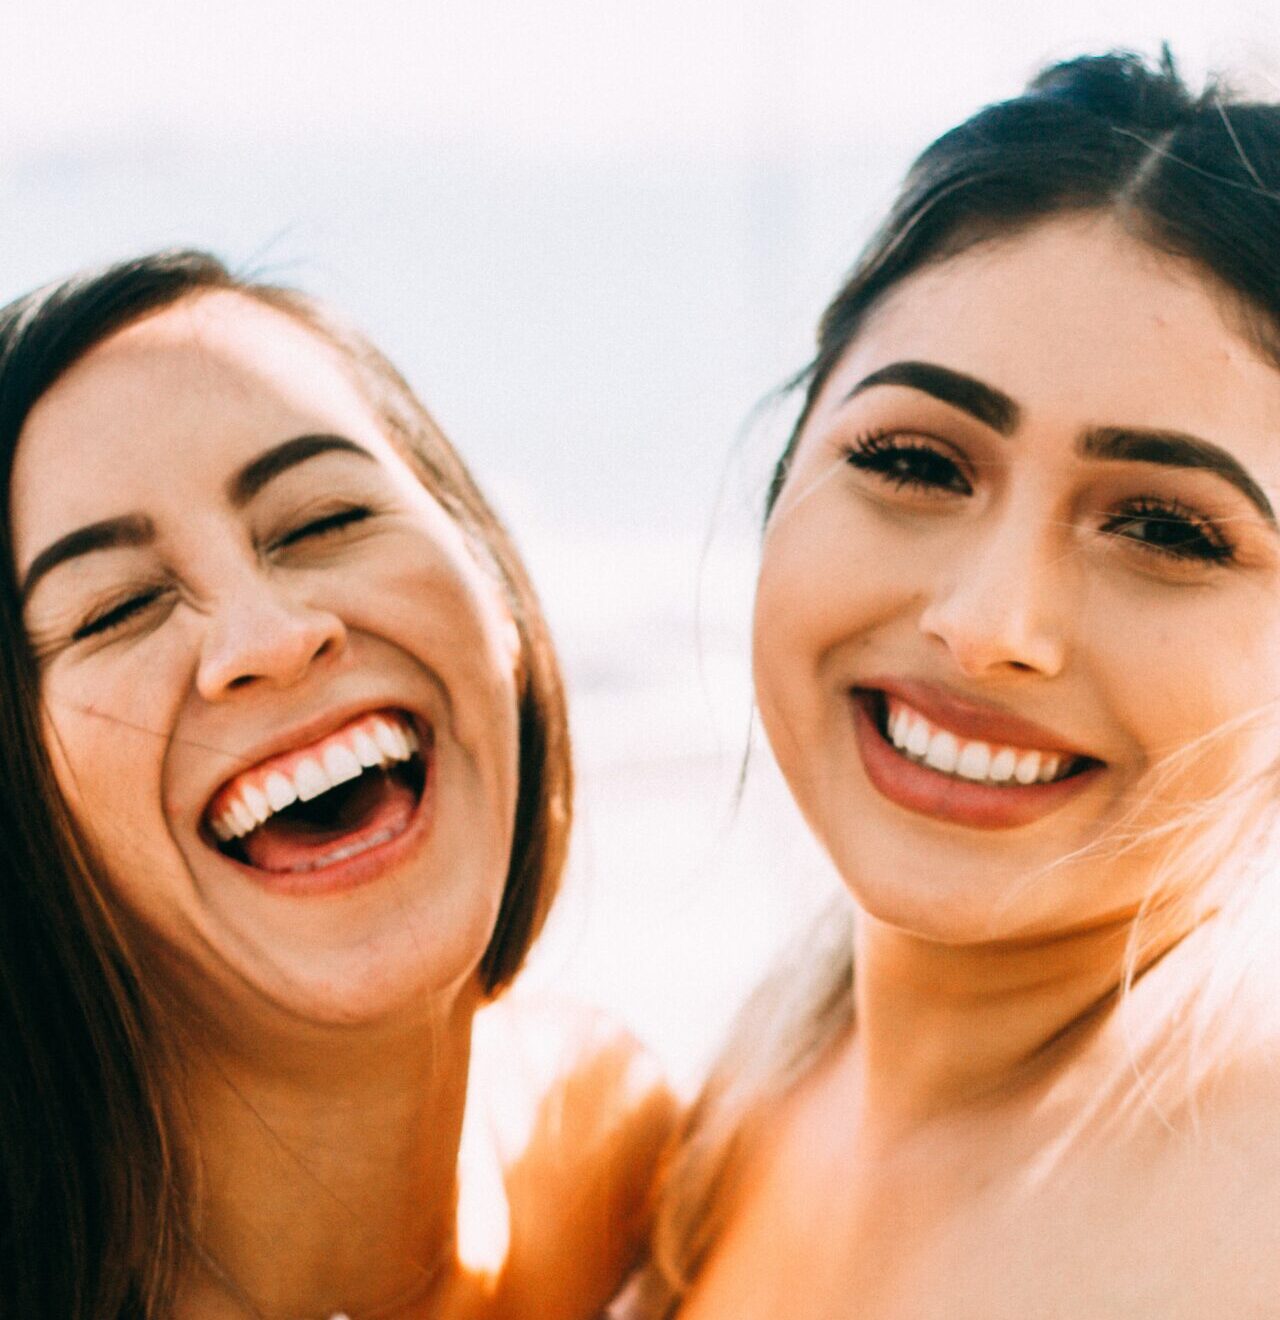 two girls laughing with great teeth